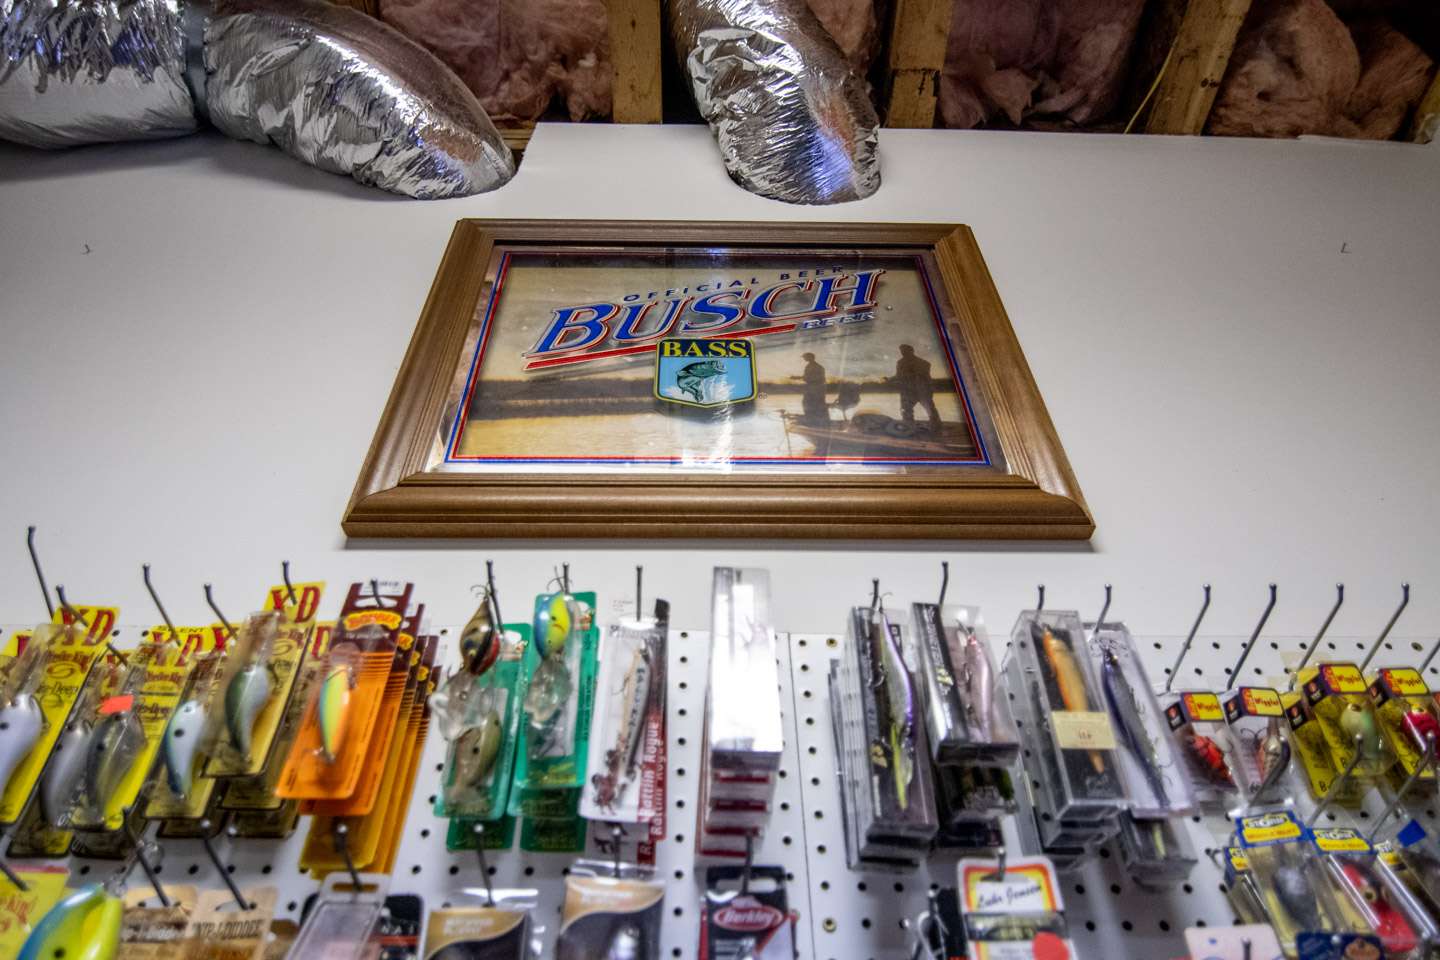 Acquired at one of his first Bassmaster Classics is a B.A.S.S. logo-adorned Busch frame which decorates the wall above the pegboard. 